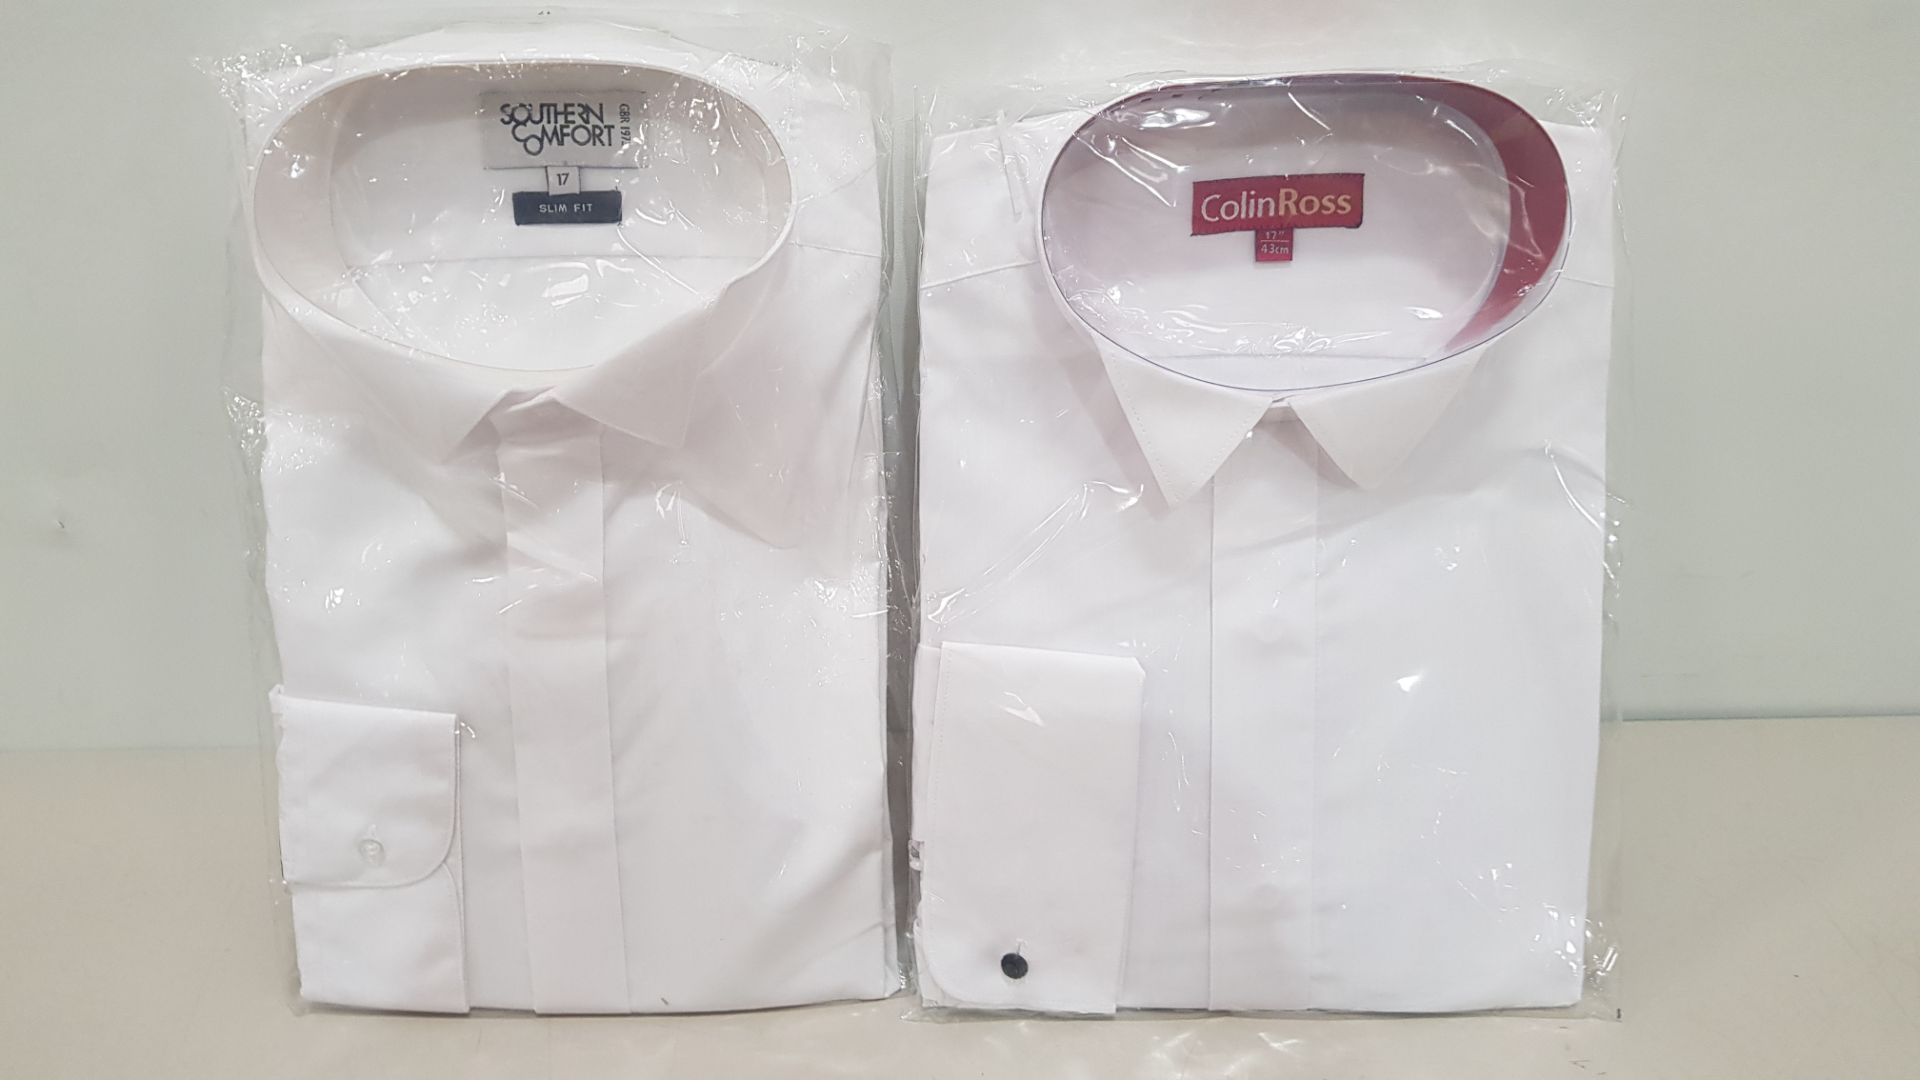 20 X BRAND NEW COLIN ROSS PACKAGED WHITE SHIRTS IN VARIOUS SIZES